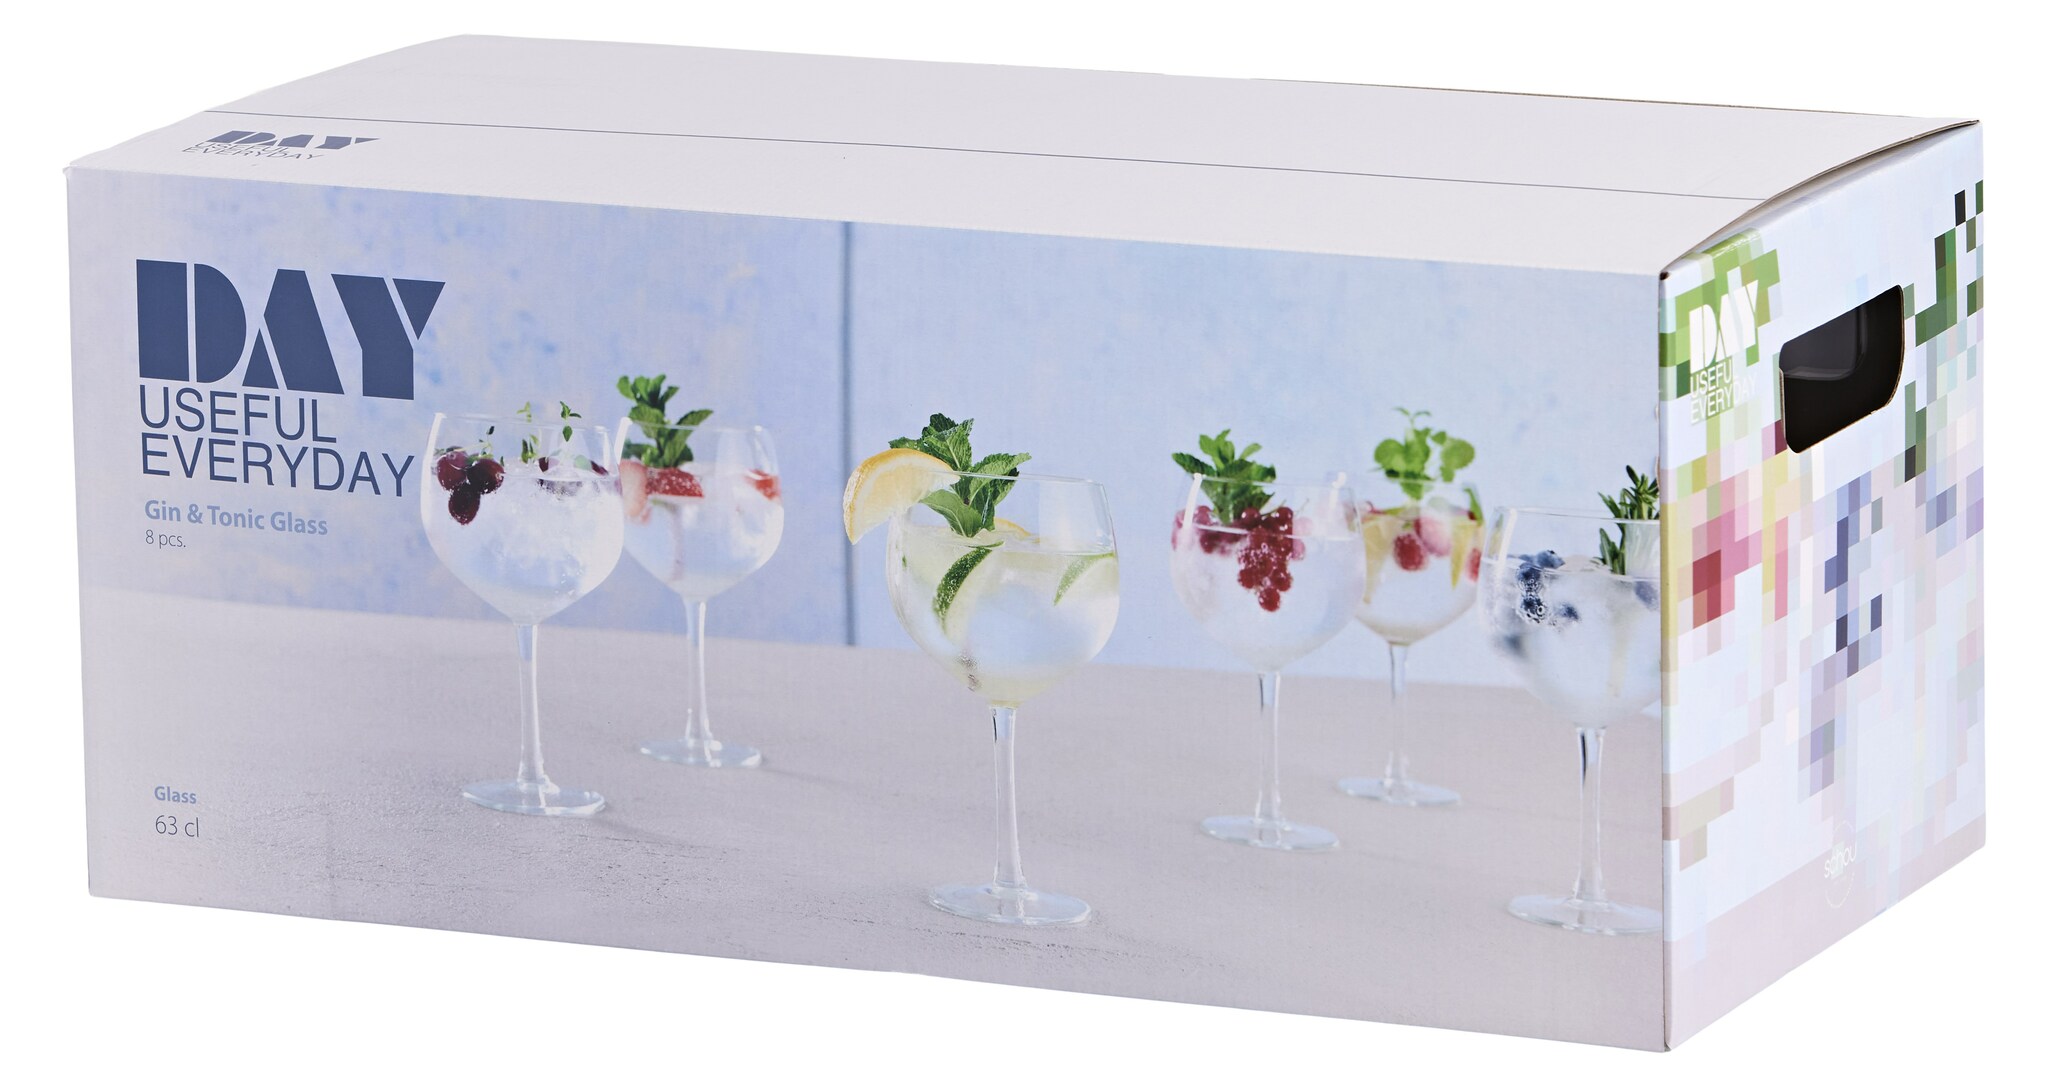 Gin & Tonic Glas 63 cl 8-pack